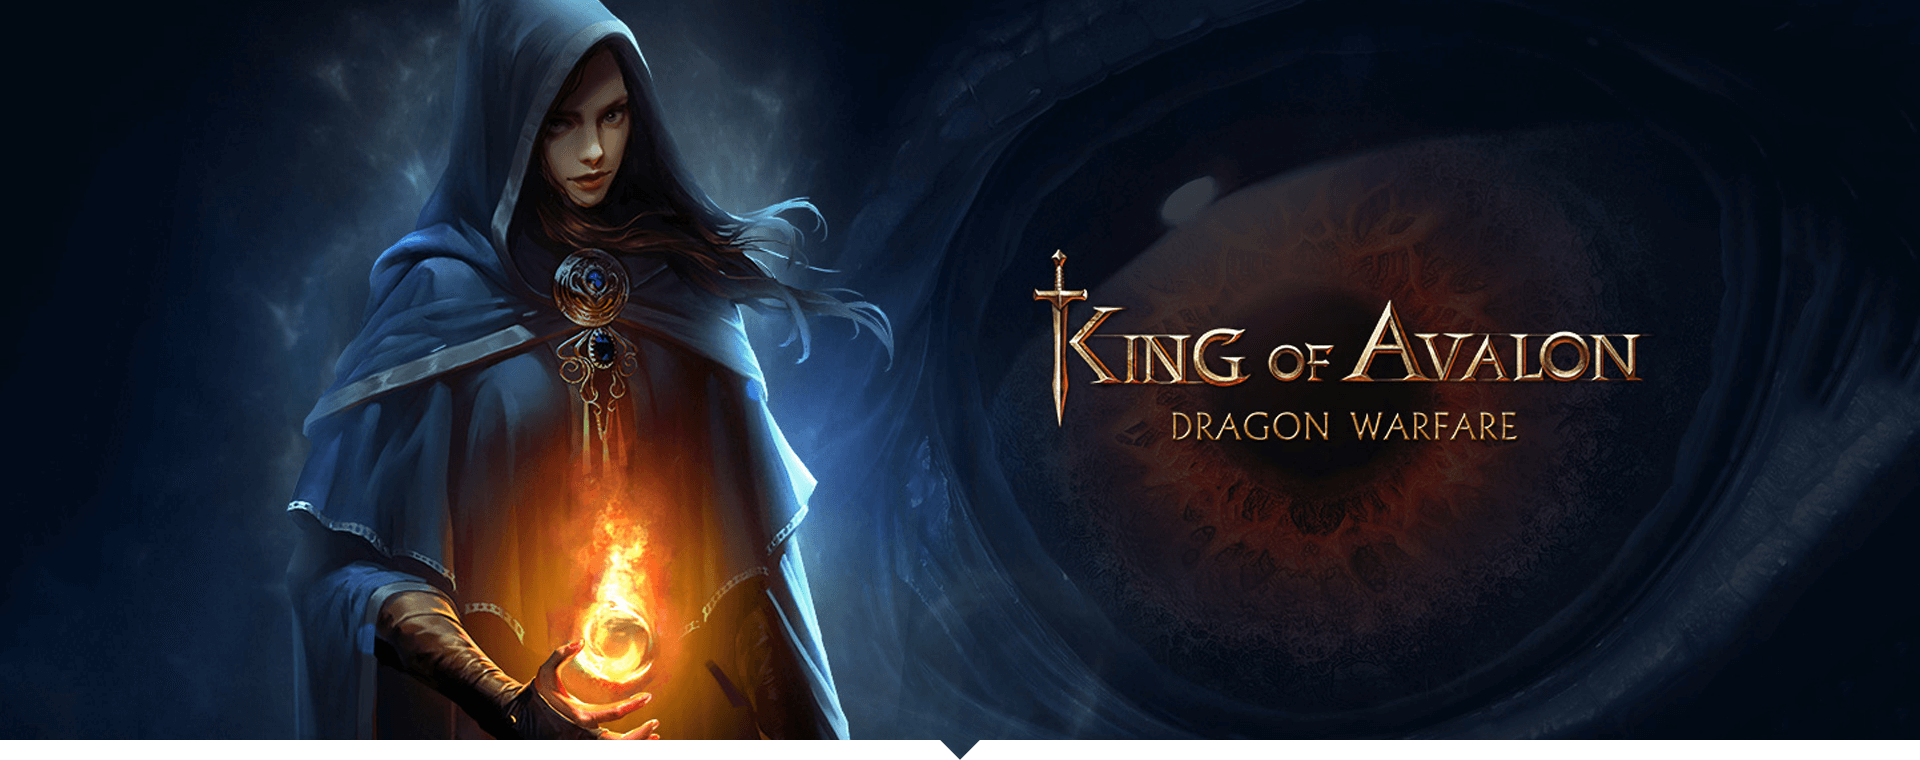 King of Avalon PC